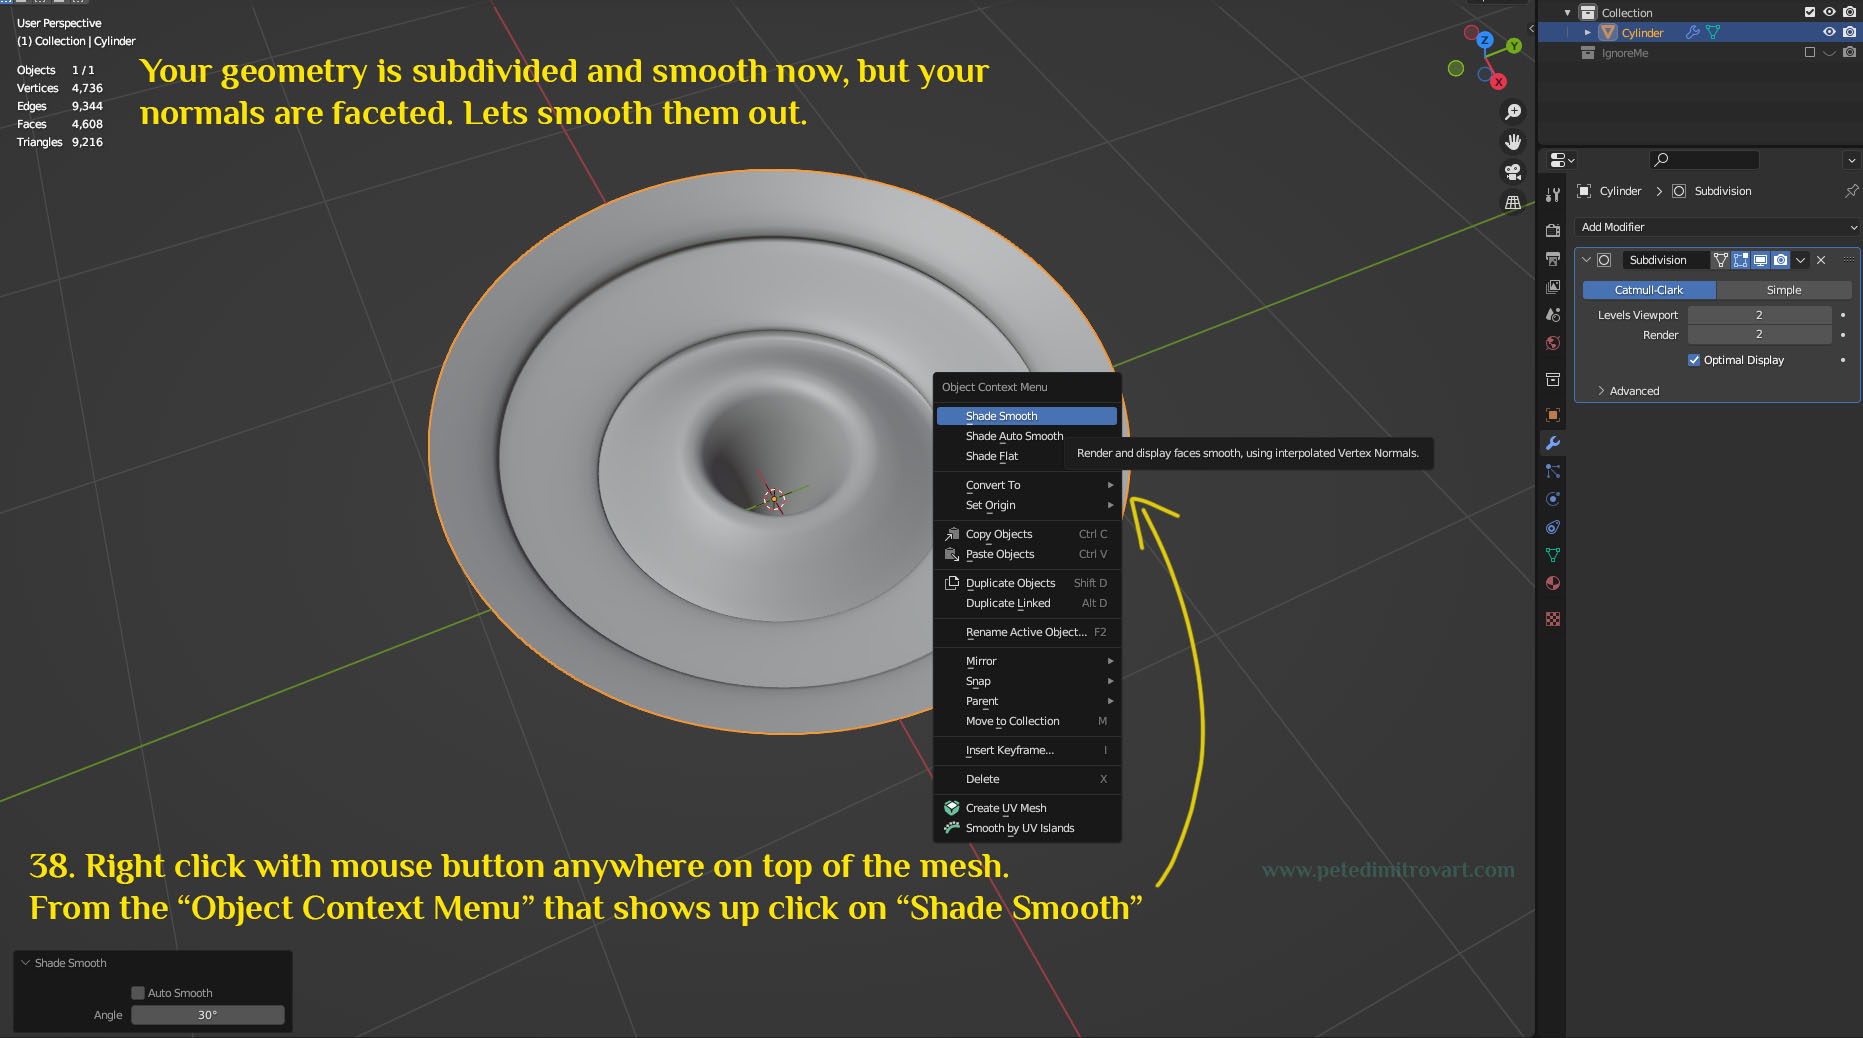 Image showing the mesh right clicked on. Then an submenu shows up - “Object Context Menu”. The mouse is hovered over “Shade Smooth”, then that option is clicked on.